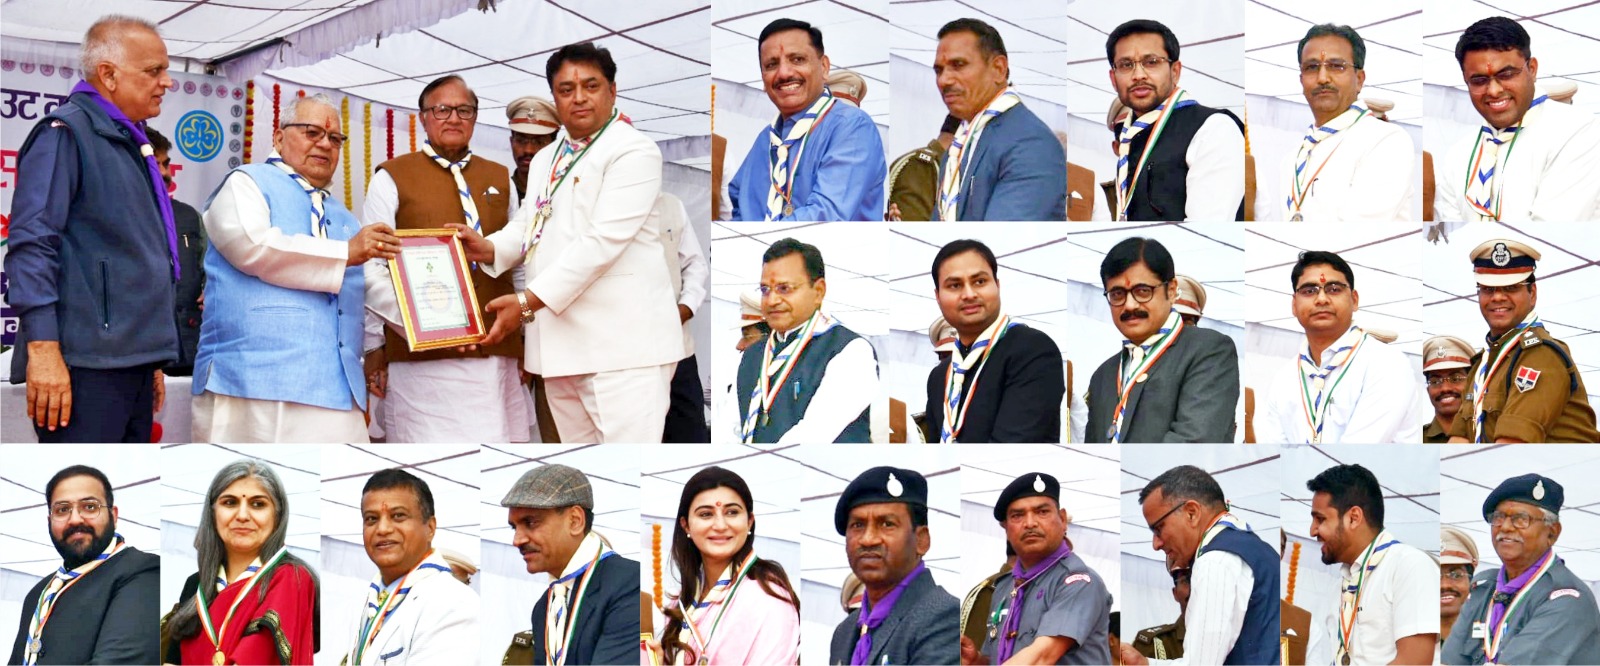 Hon'ble Governor awarded medals of merit to the administrative officers and other associates for their remarkable cooperation in organizing Jamboree